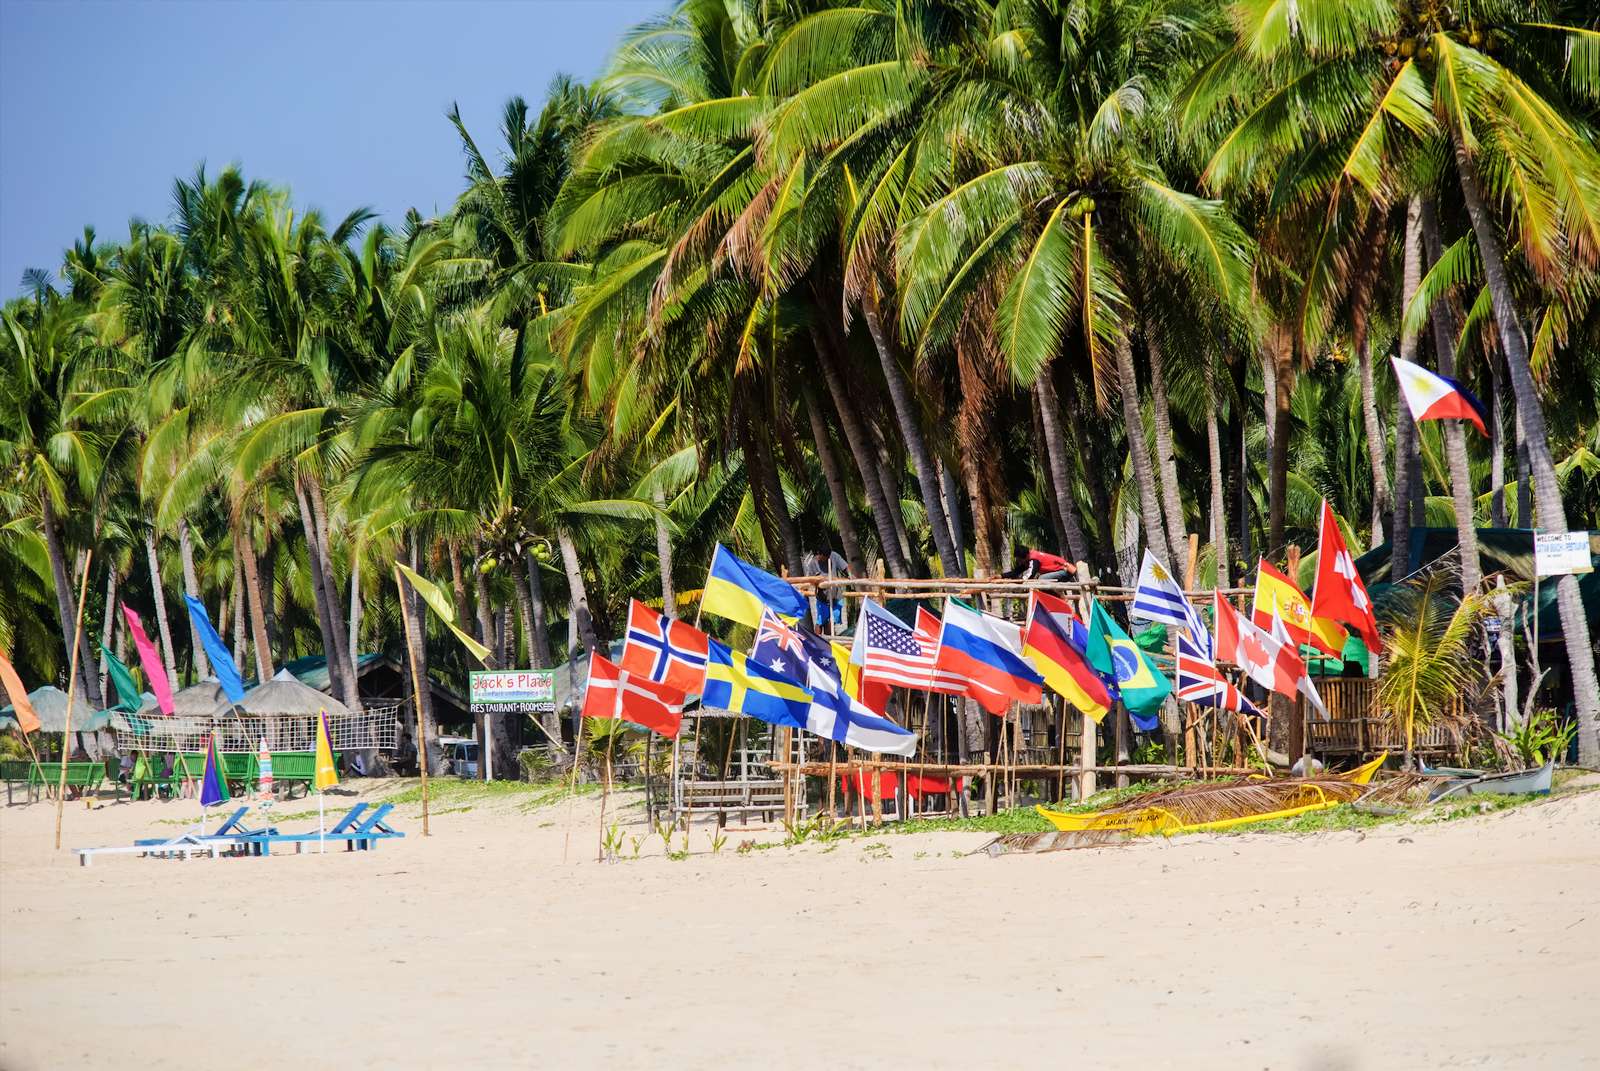 Jack's Place and its collection of flags, Nacpan Beach, El Nido